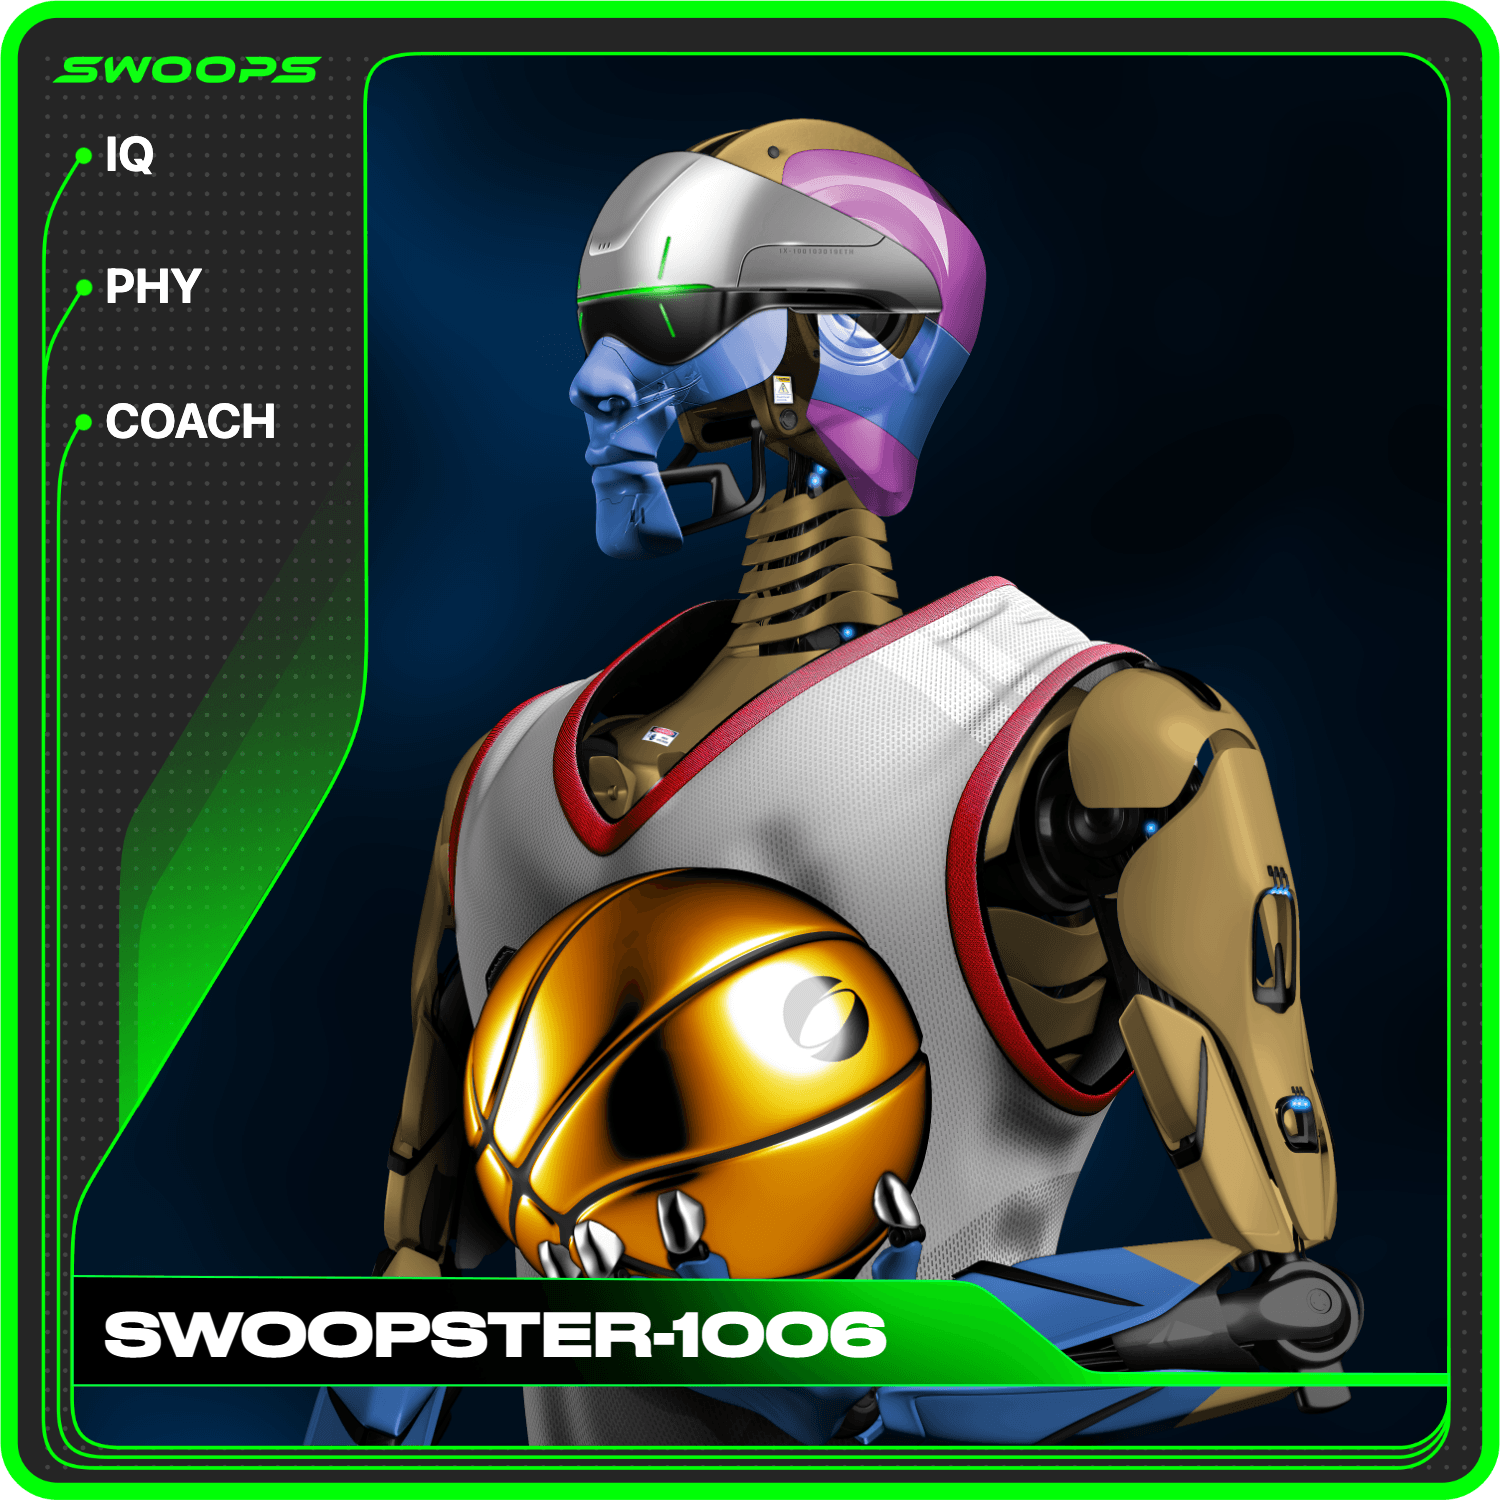 SWOOPSTER-1006